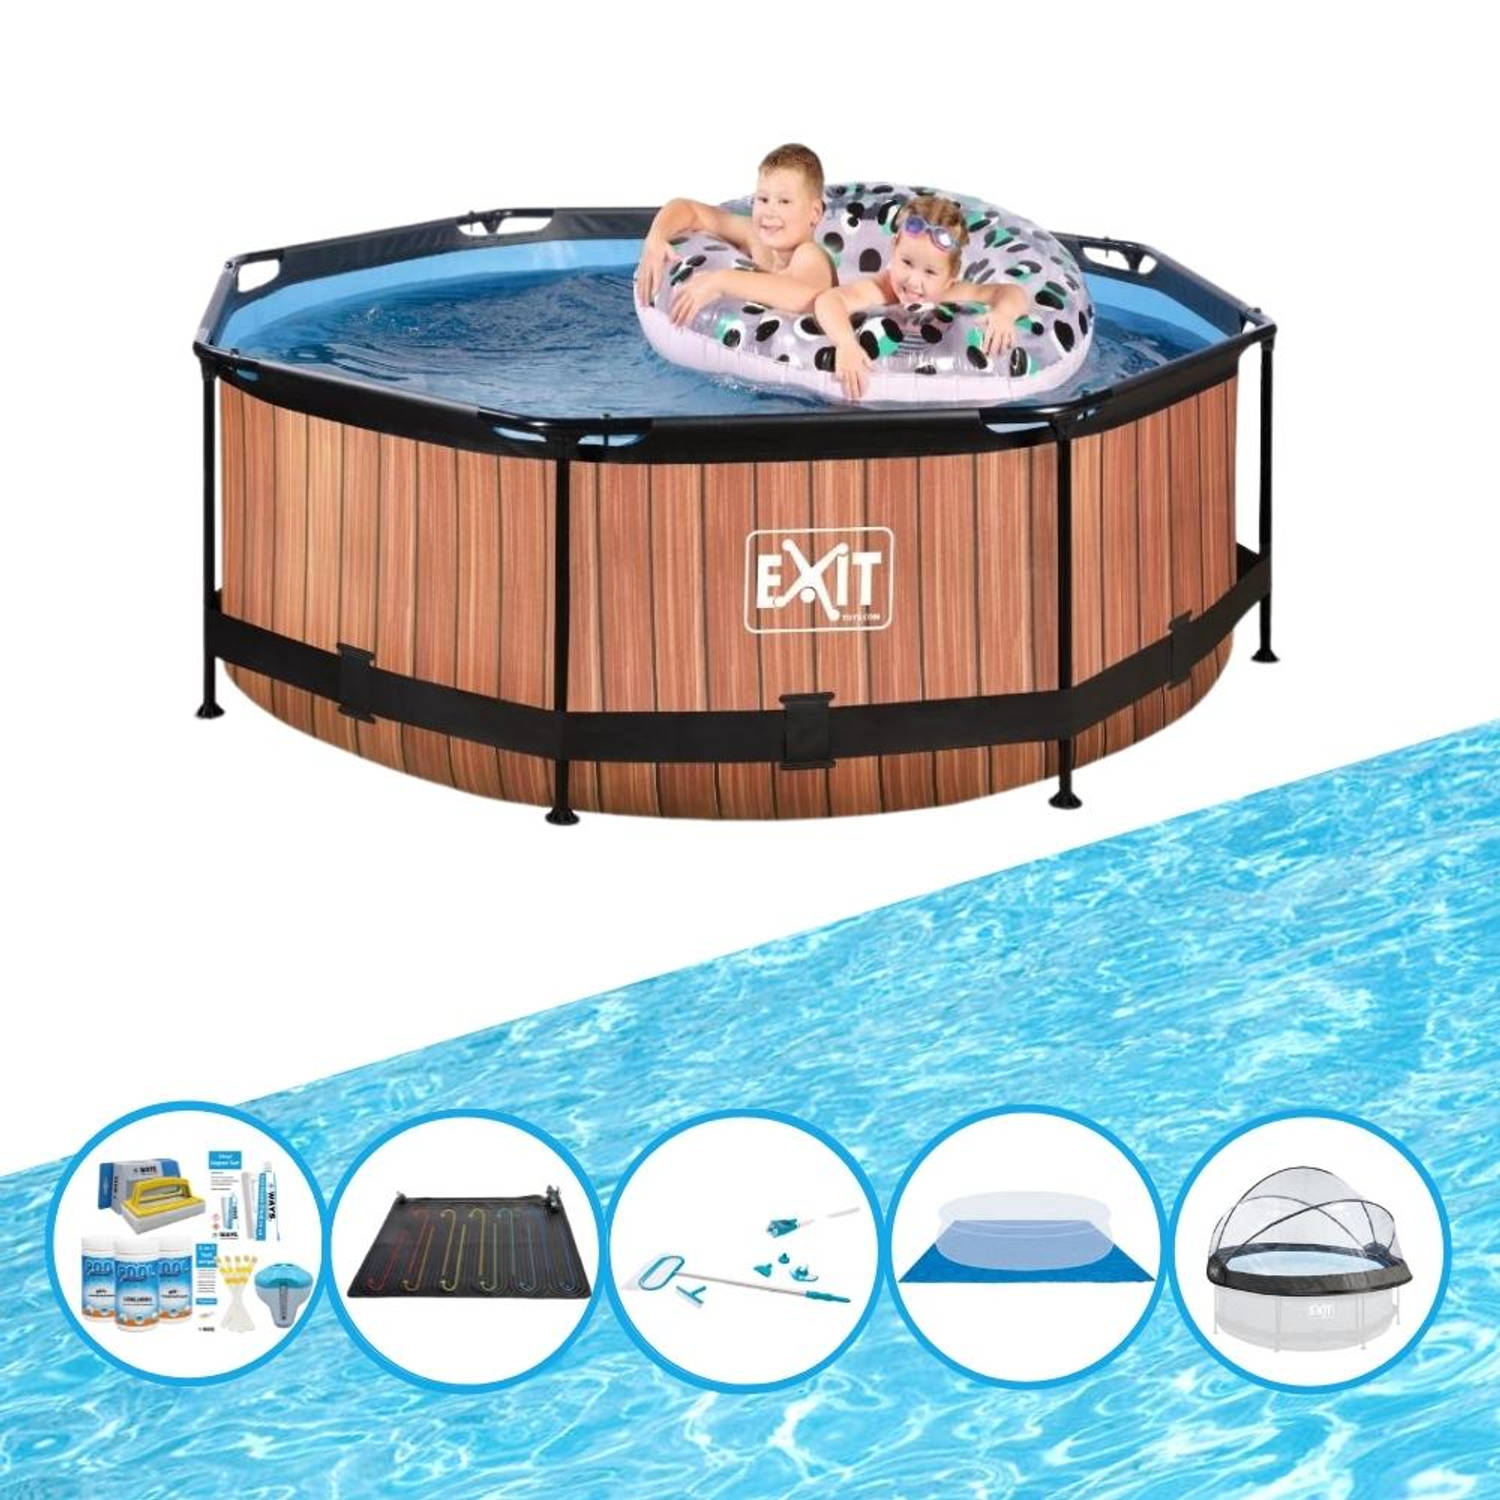 EXIT Toys Exit Zwembad Timber Style - ø244x76 Cm - Frame Pool - Inclusief Bijbehorende Accessoires - Bruin